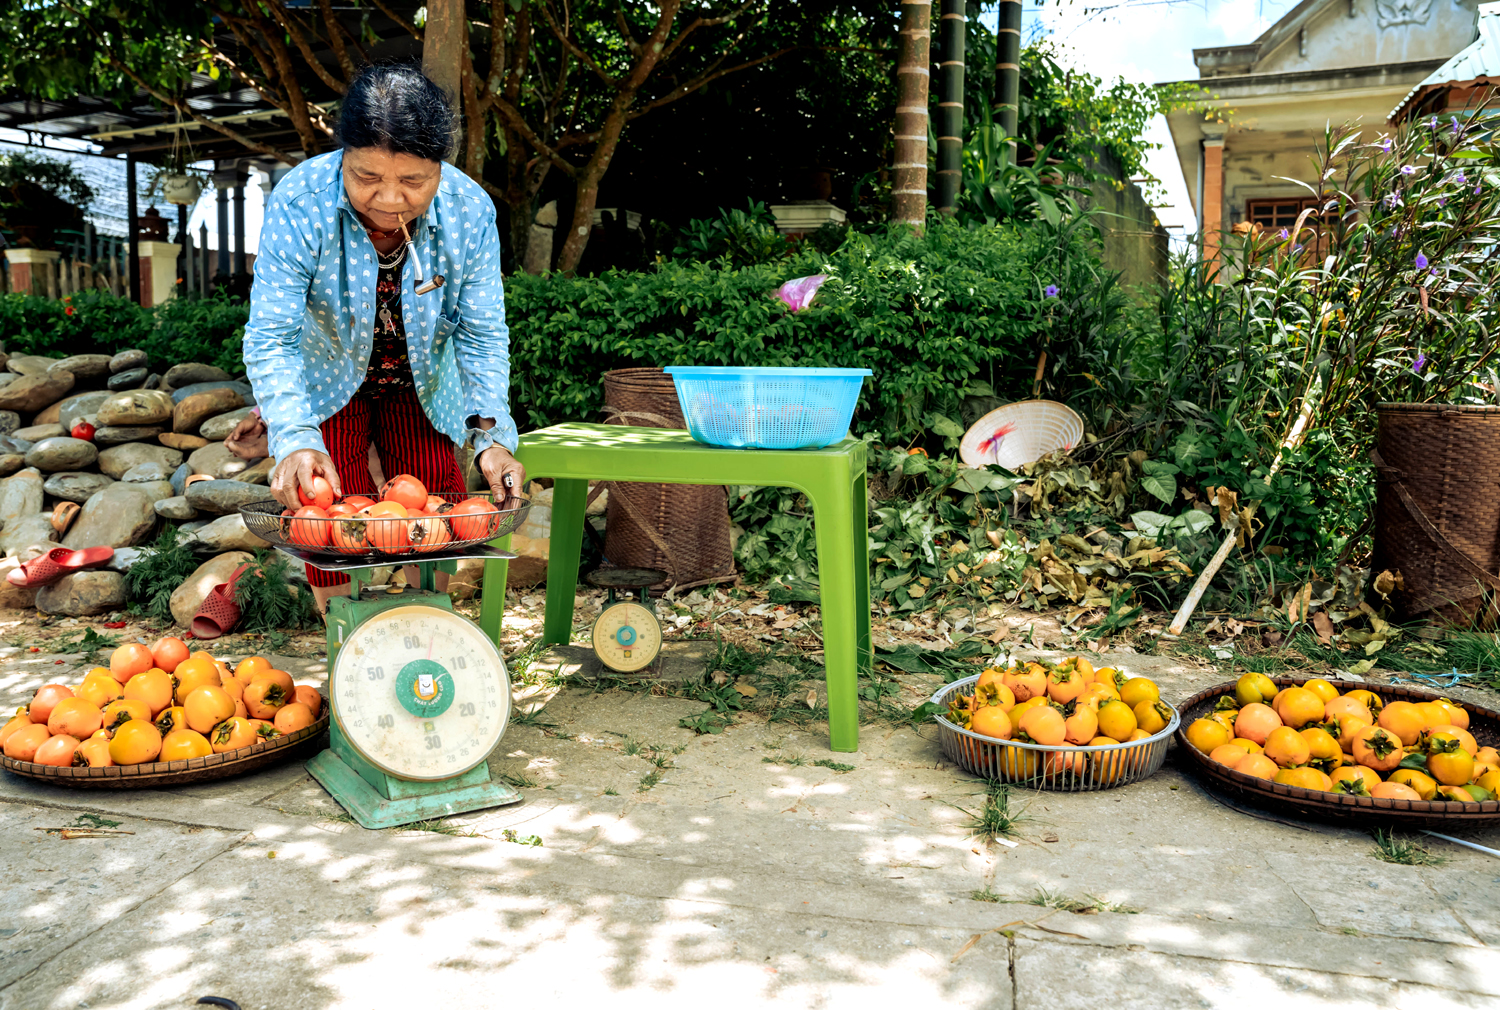 It is easy to bump into the image of persimmon baskets set for sell on Ho Chi Minh roadsides 